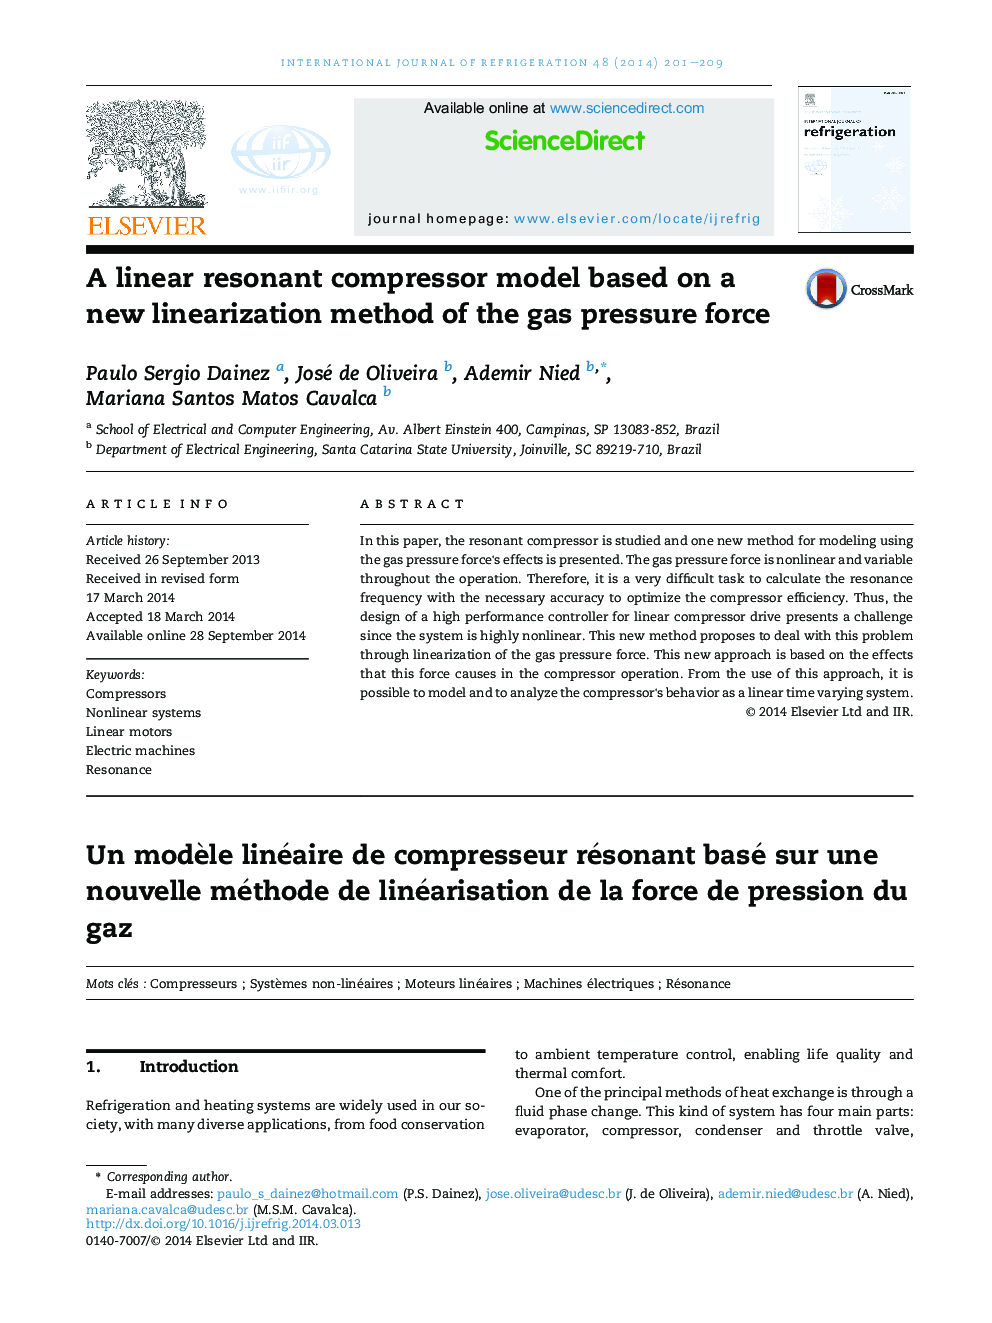 A linear resonant compressor model based on a new linearization method of the gas pressure force